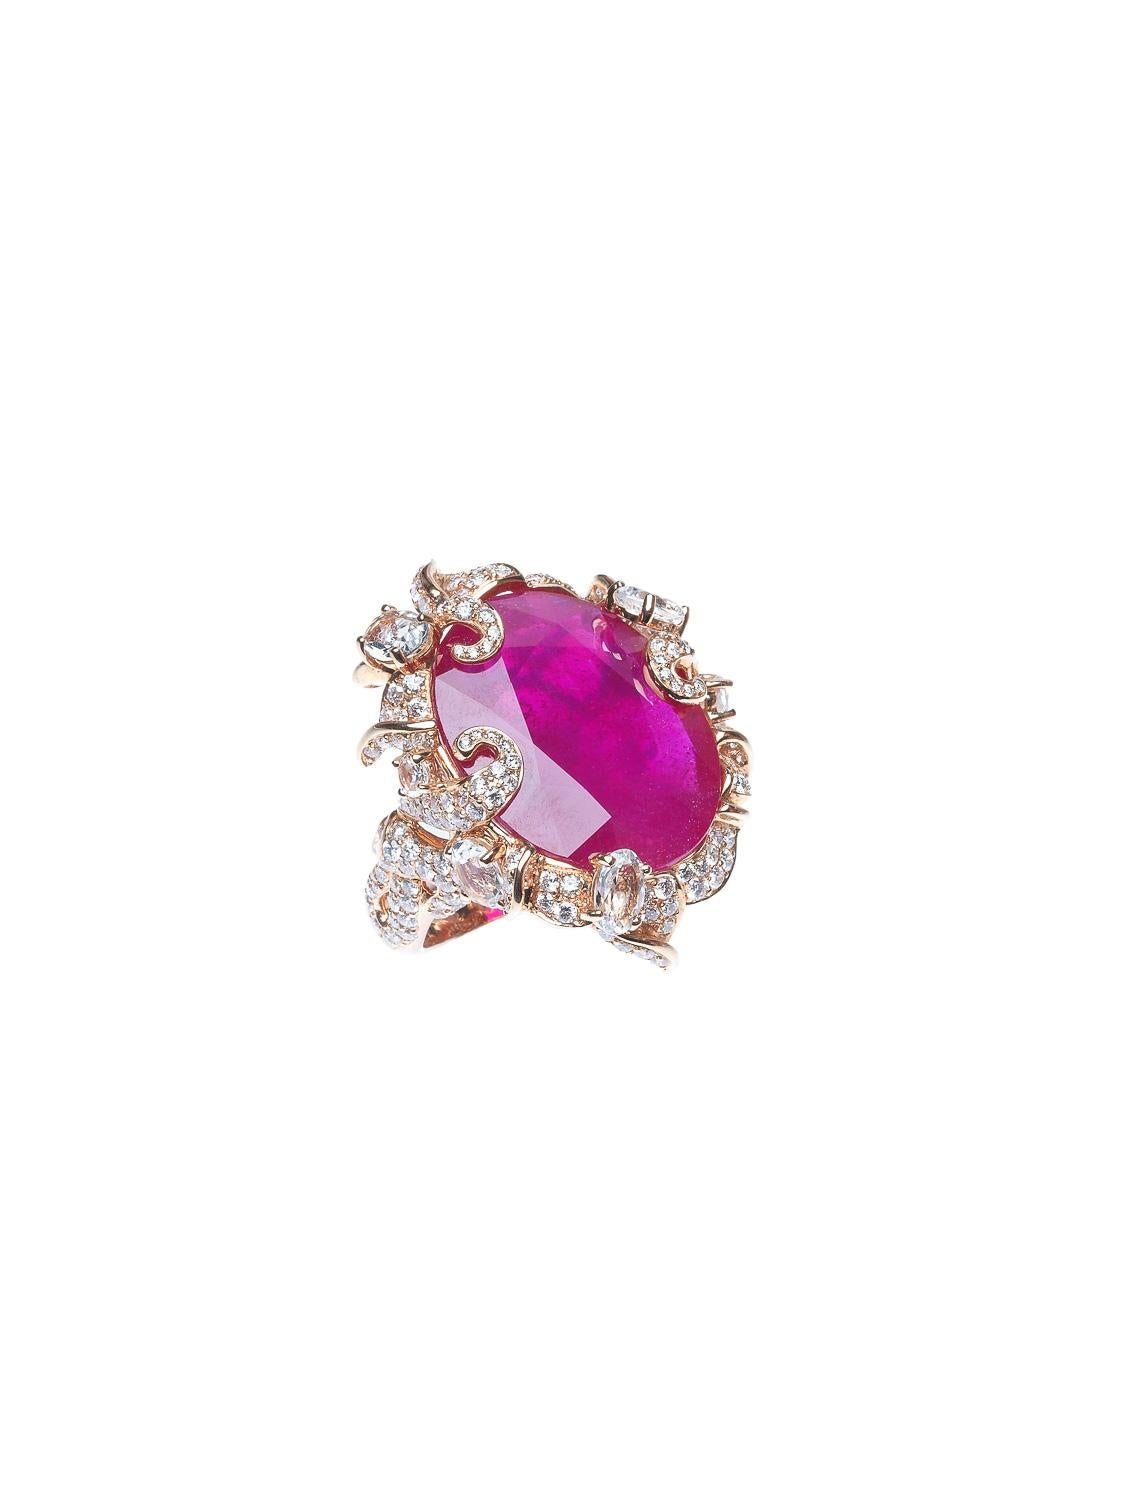 Ring with round brilliant diamonds, carat total weight 3.14, topazes, carat total weight 4.72, and a ruby, 32.49 ct, set in a rose gold mounting, total weight 20.12 g